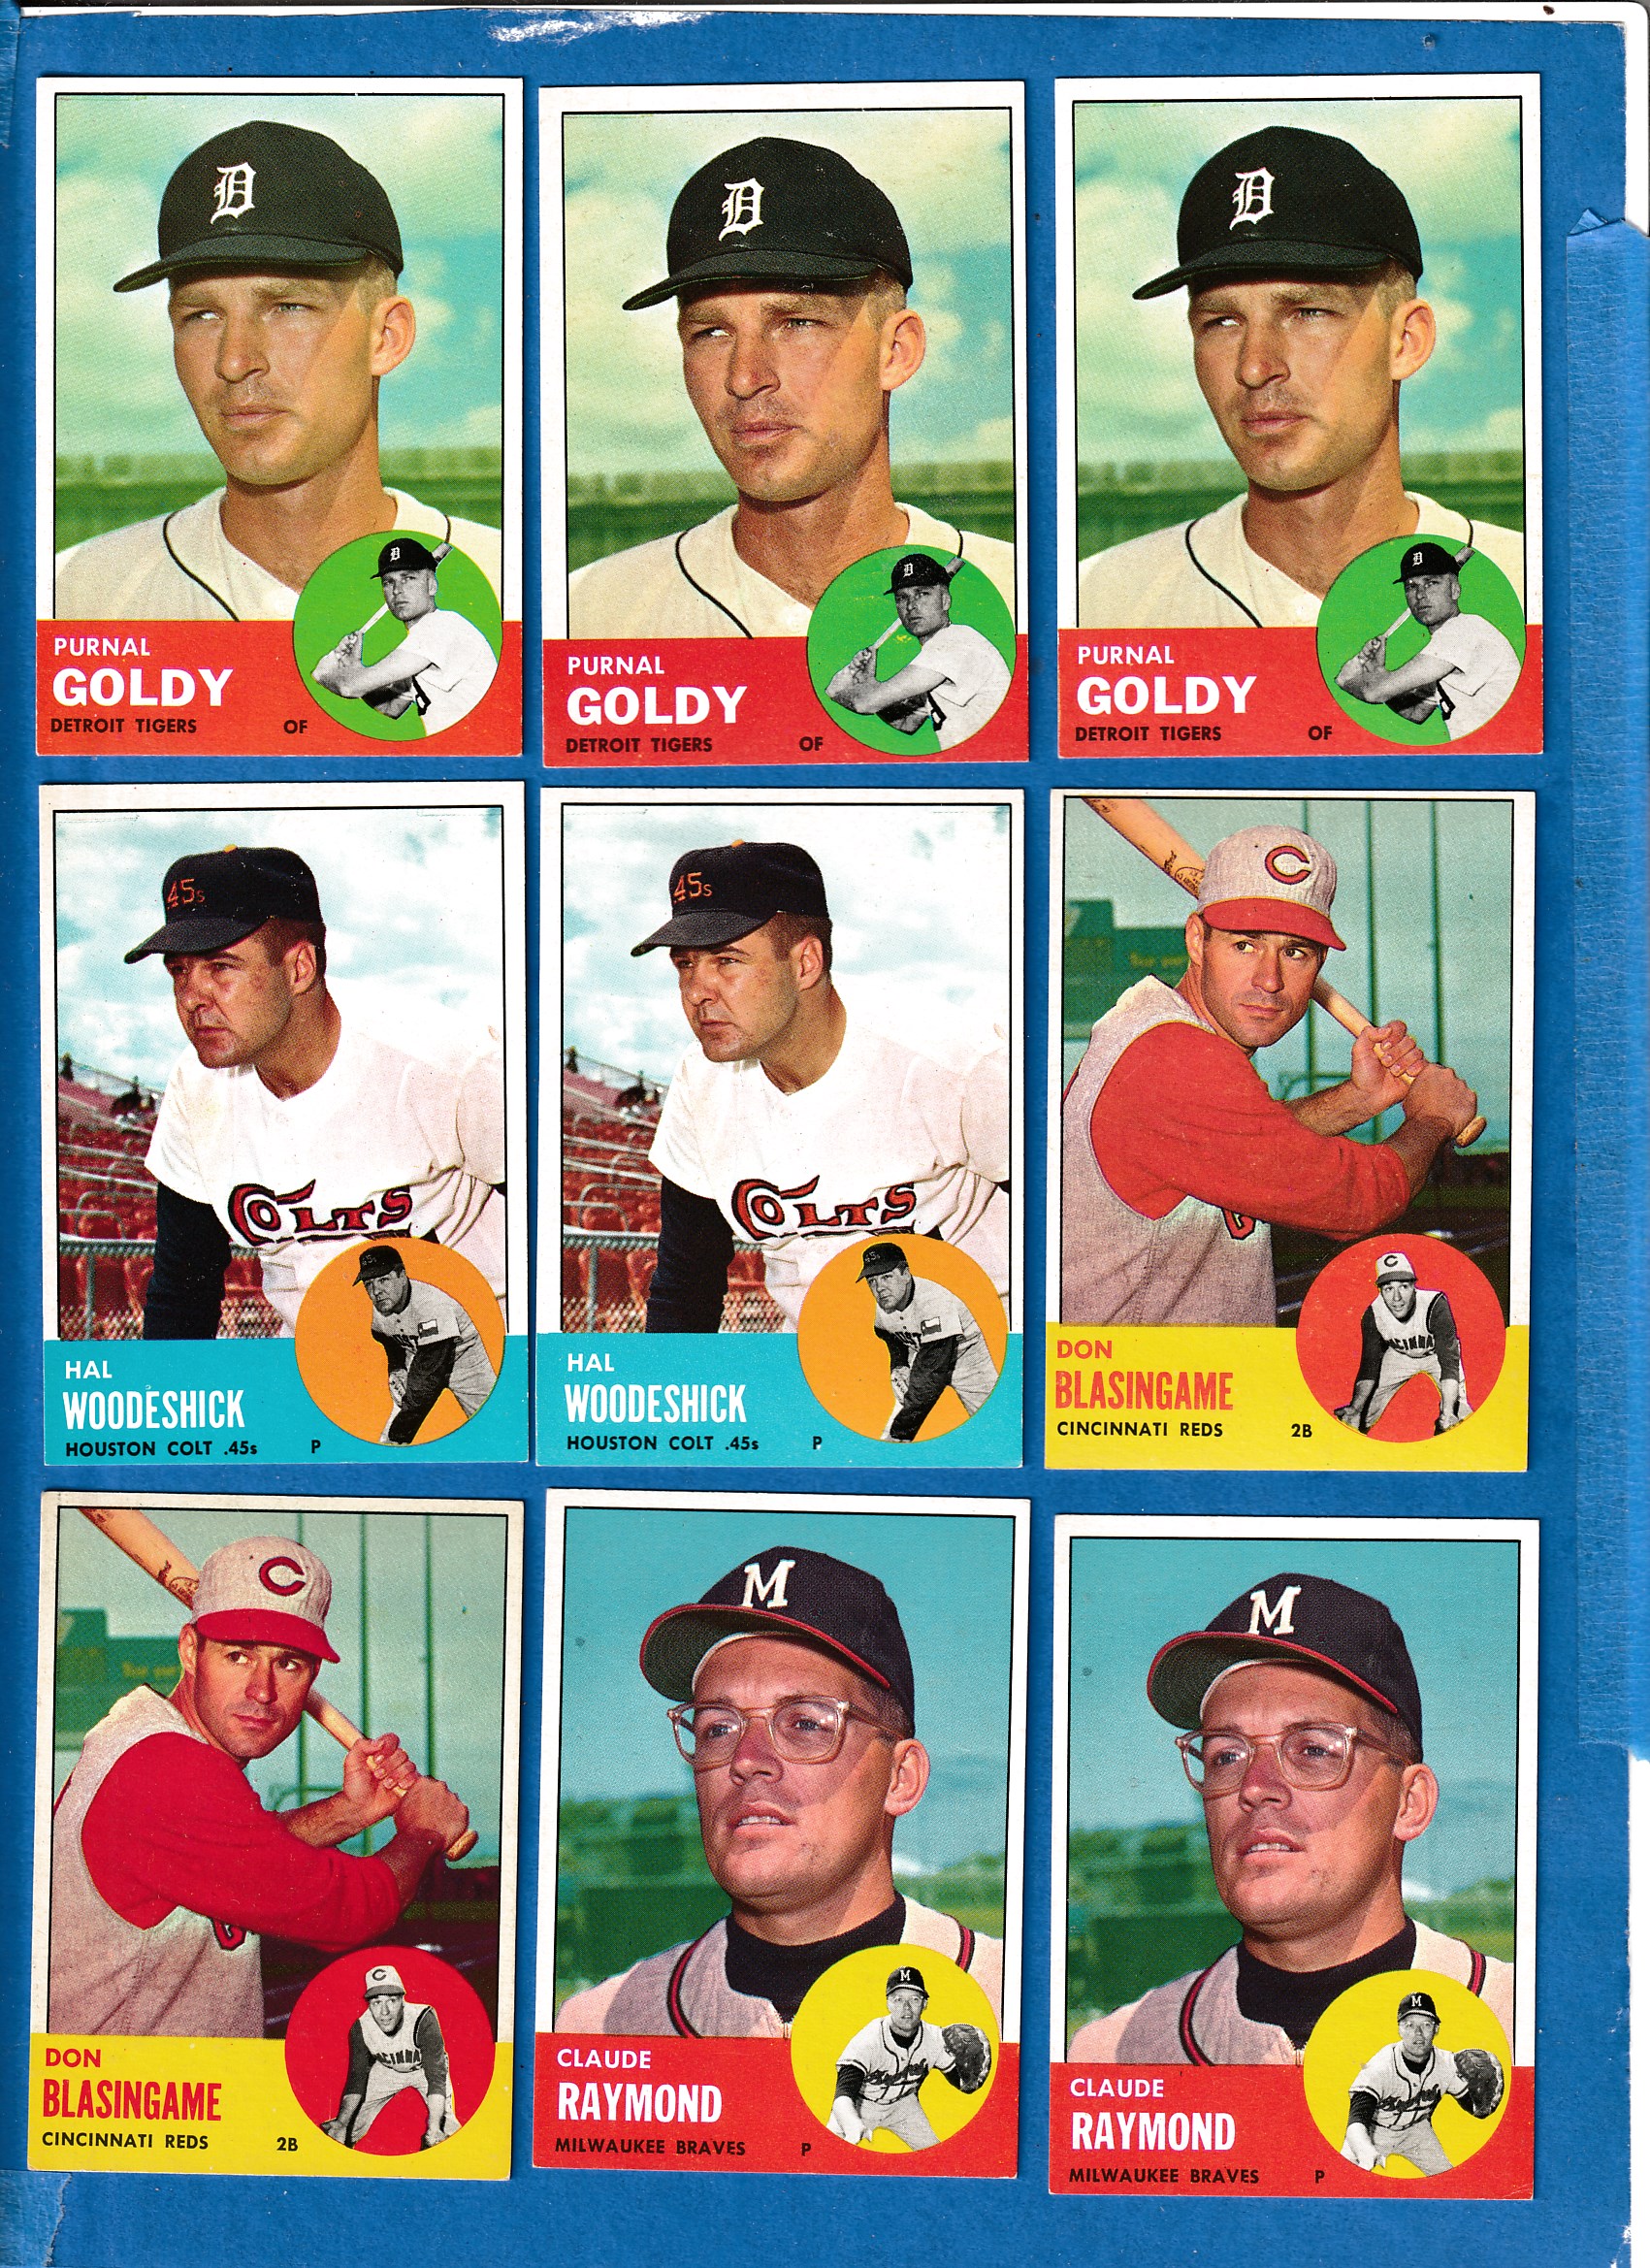 1963 Topps #516 Prunal Goldy SCARCEST MID SERIES (Tigers) Baseball cards value